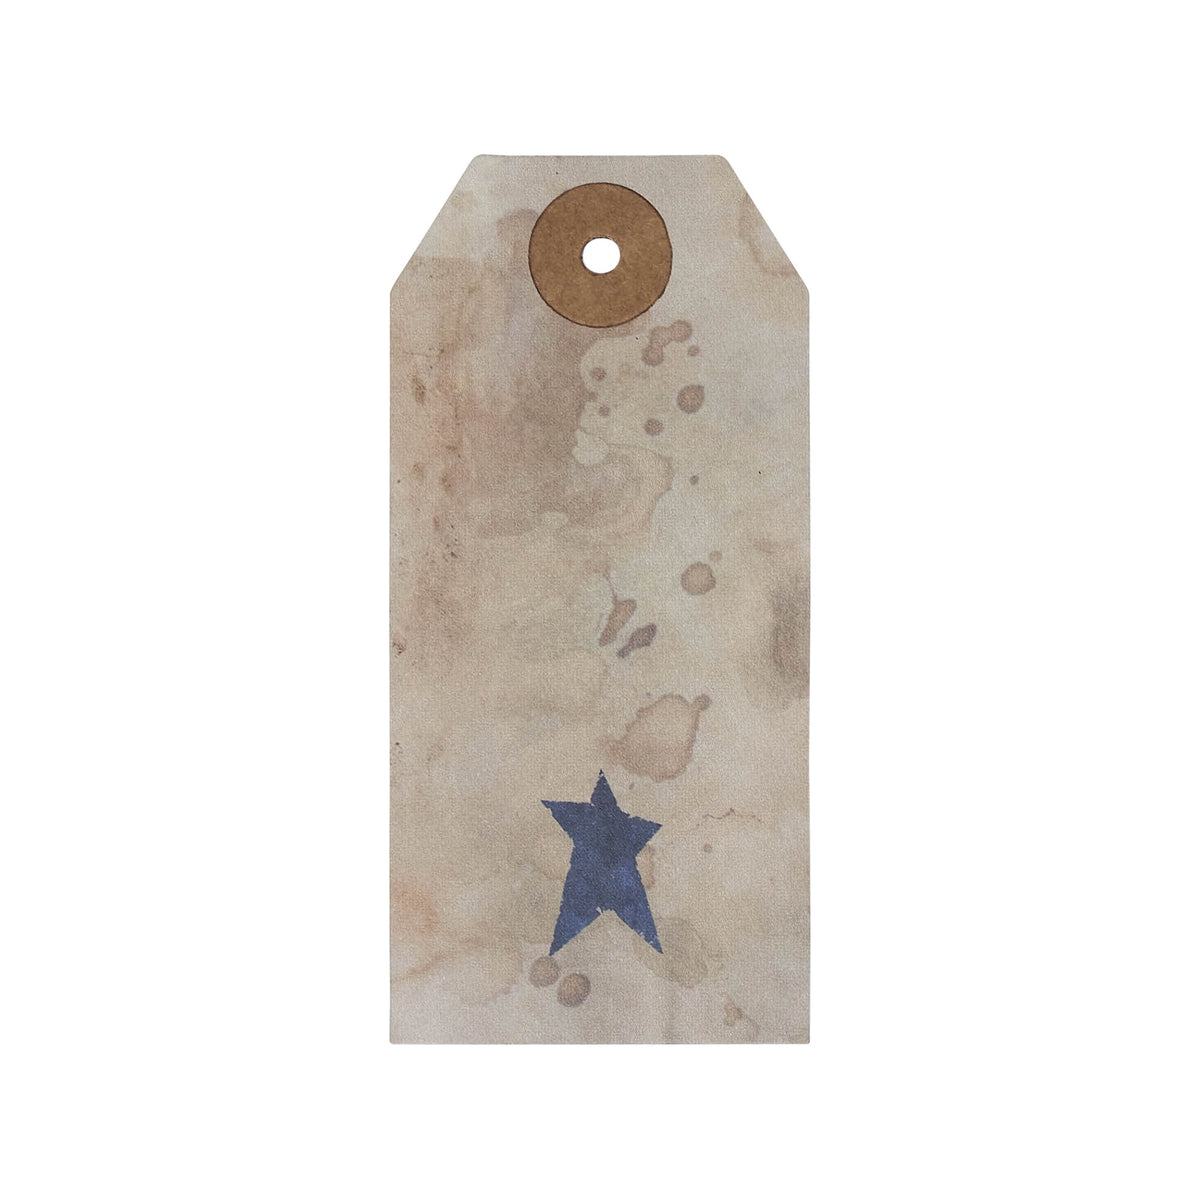 Primitive Star Tea Stained Paper Tag Navy 3.75x1.75 w/ Twine Set of 50